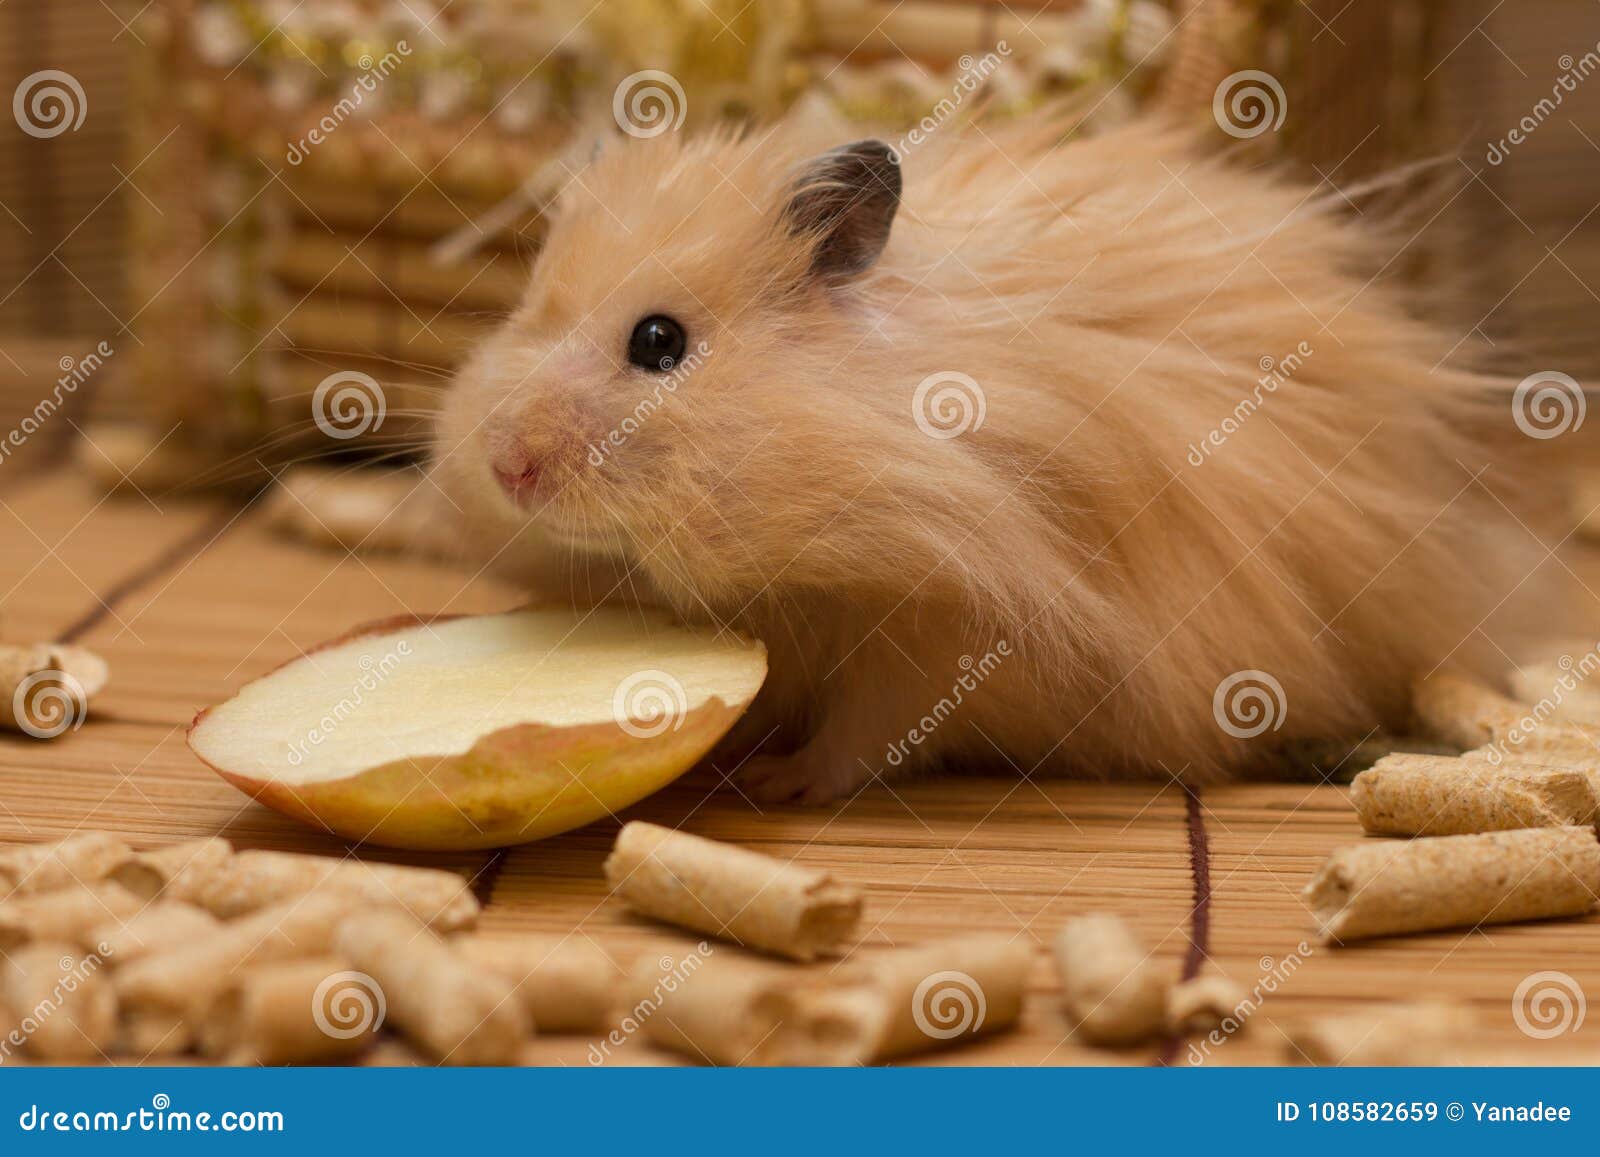 Funny Syrian hamster stock image. Image of rodent, fruit - 108582659